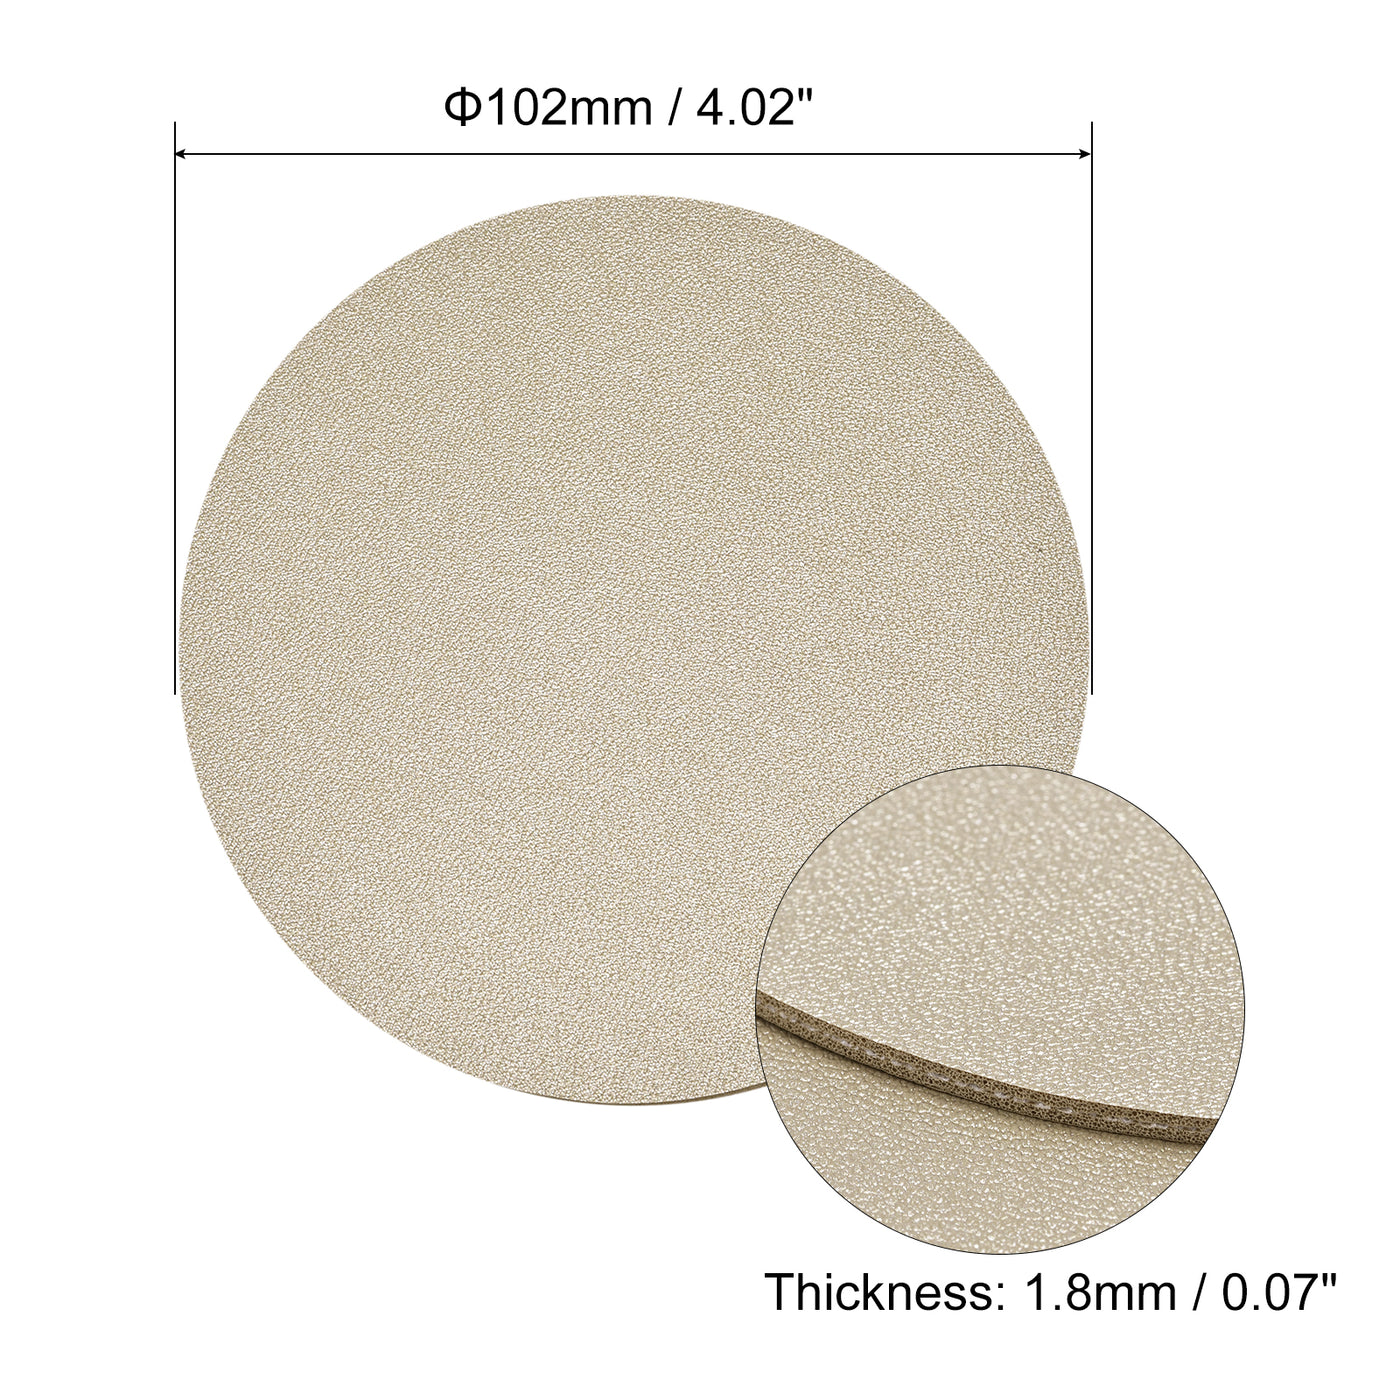 uxcell Uxcell 102mm(4.02") Round Coasters PU Cup Mat Pad for Tableware Gold Tone 6pcs